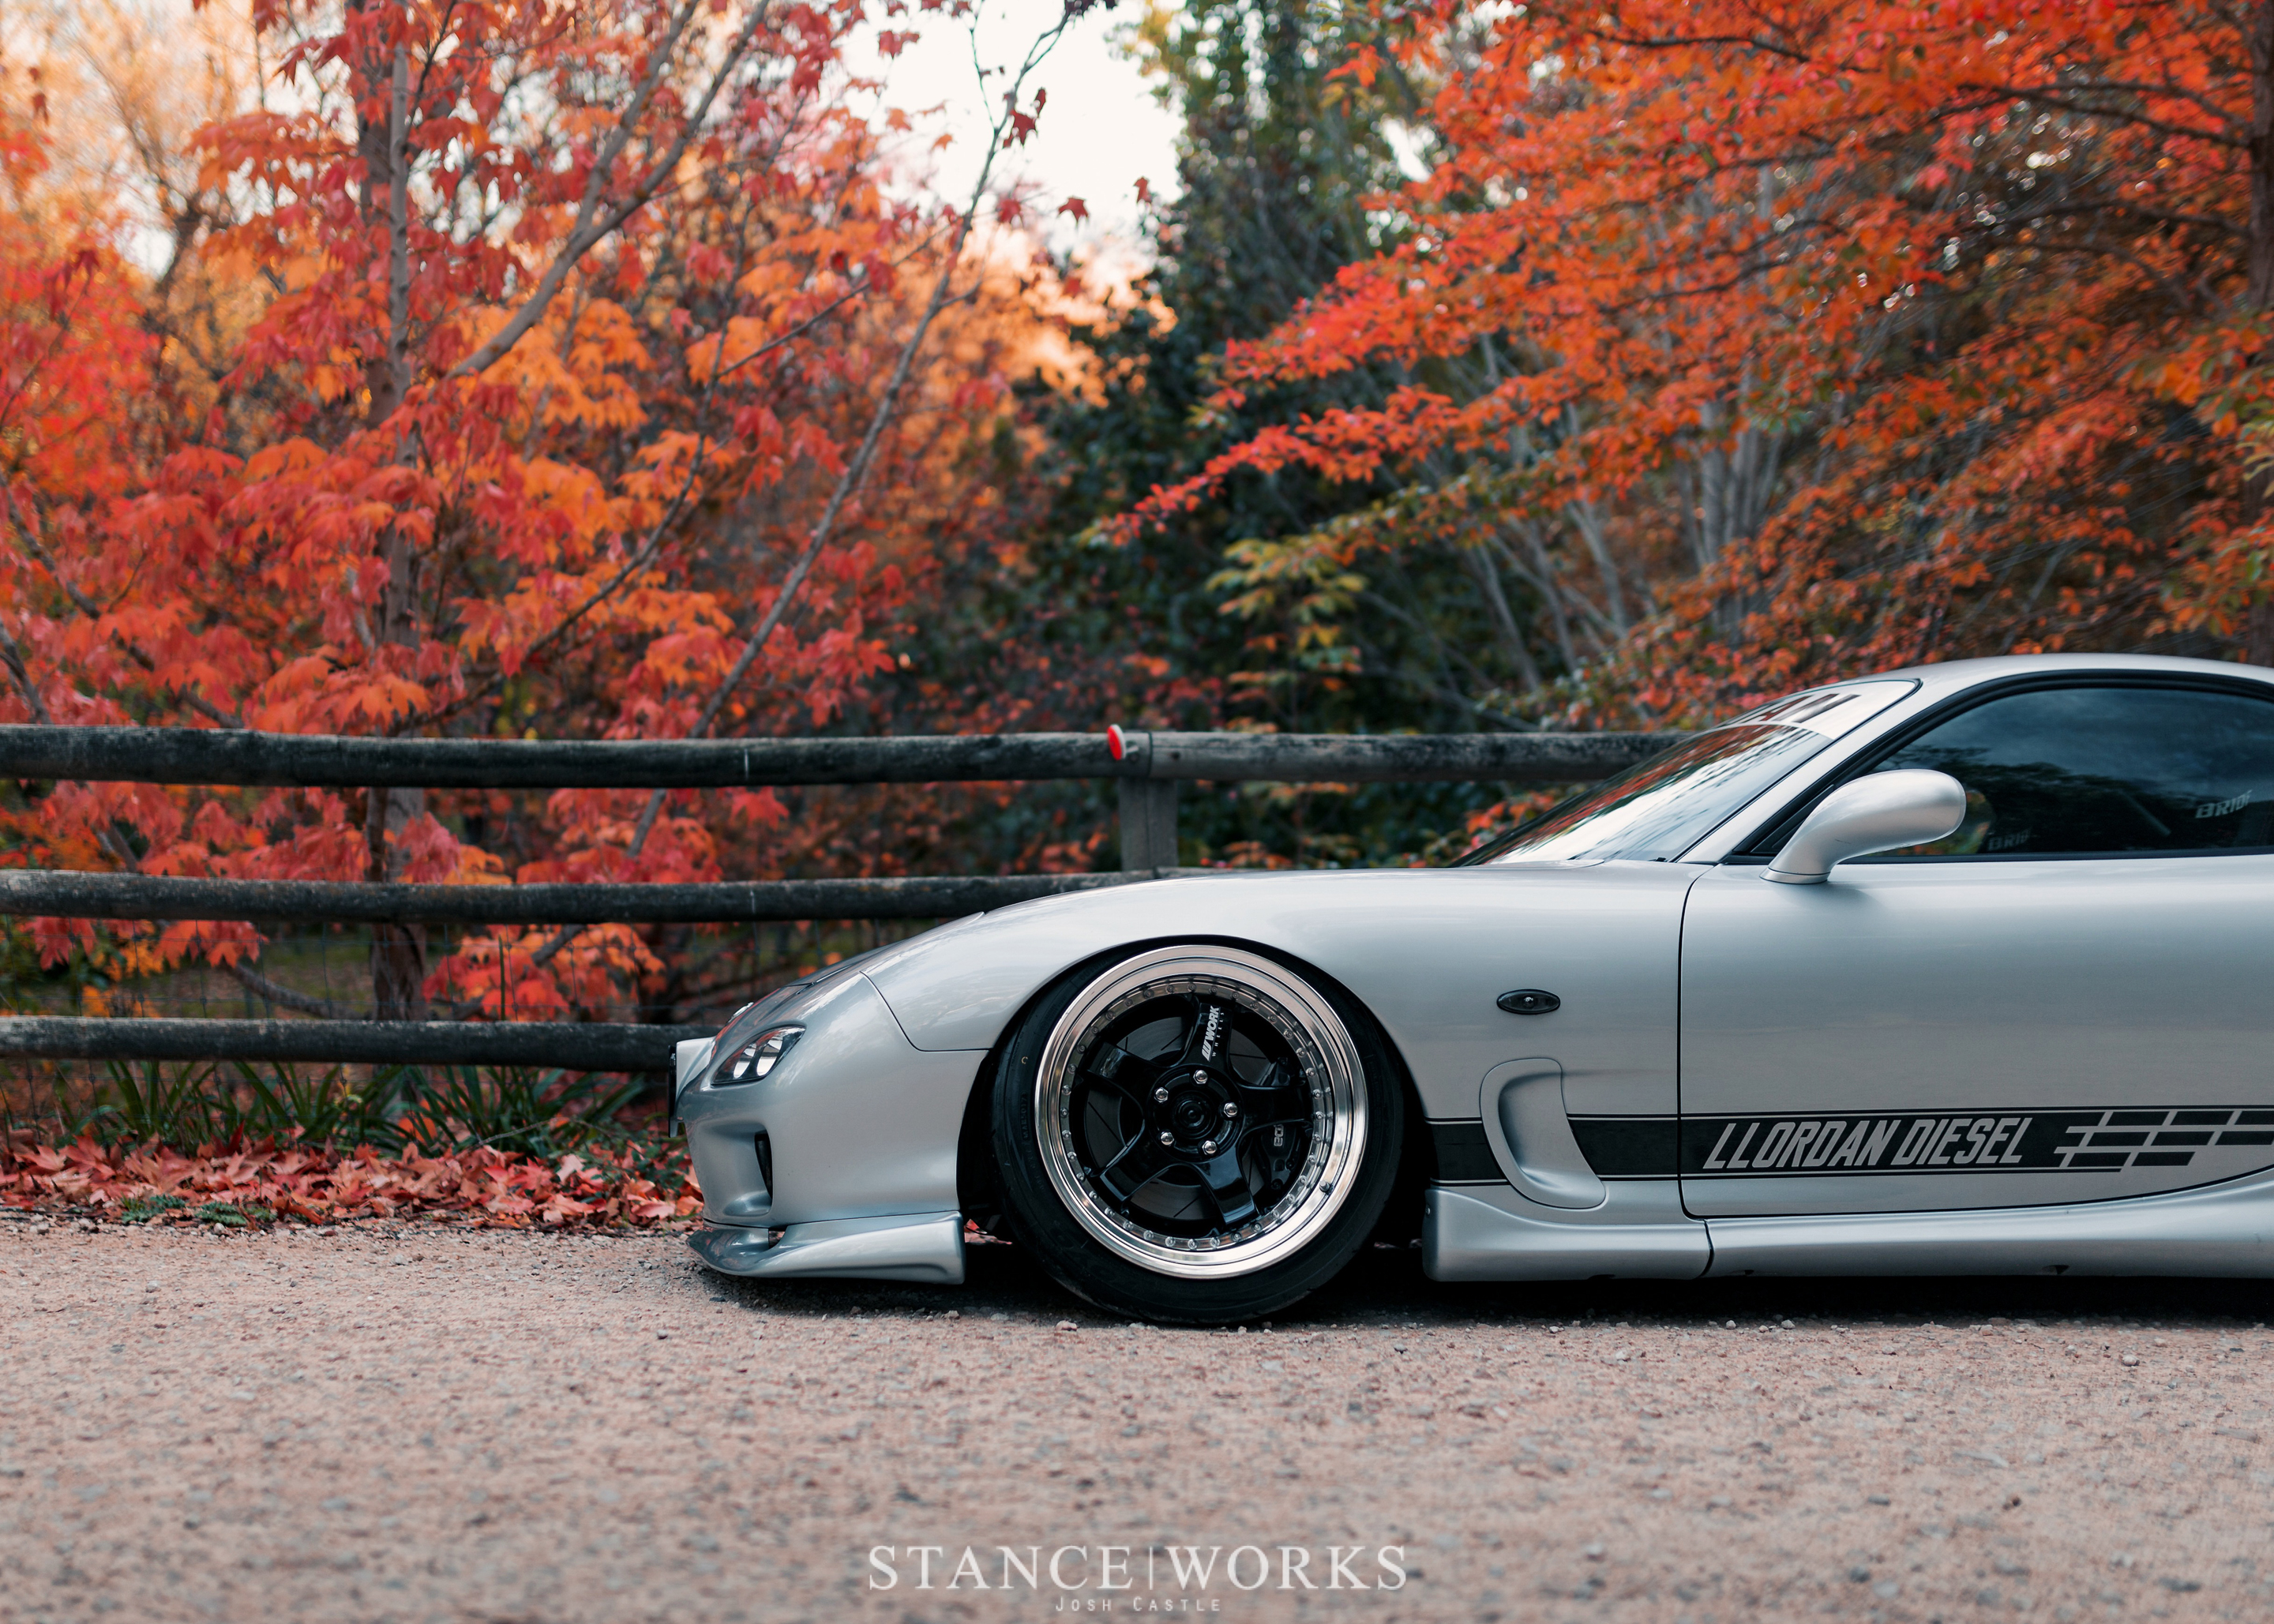 Anything But Luck - Adam Cannell’s Series 8 FD RX7 - Photographed by Josh C...